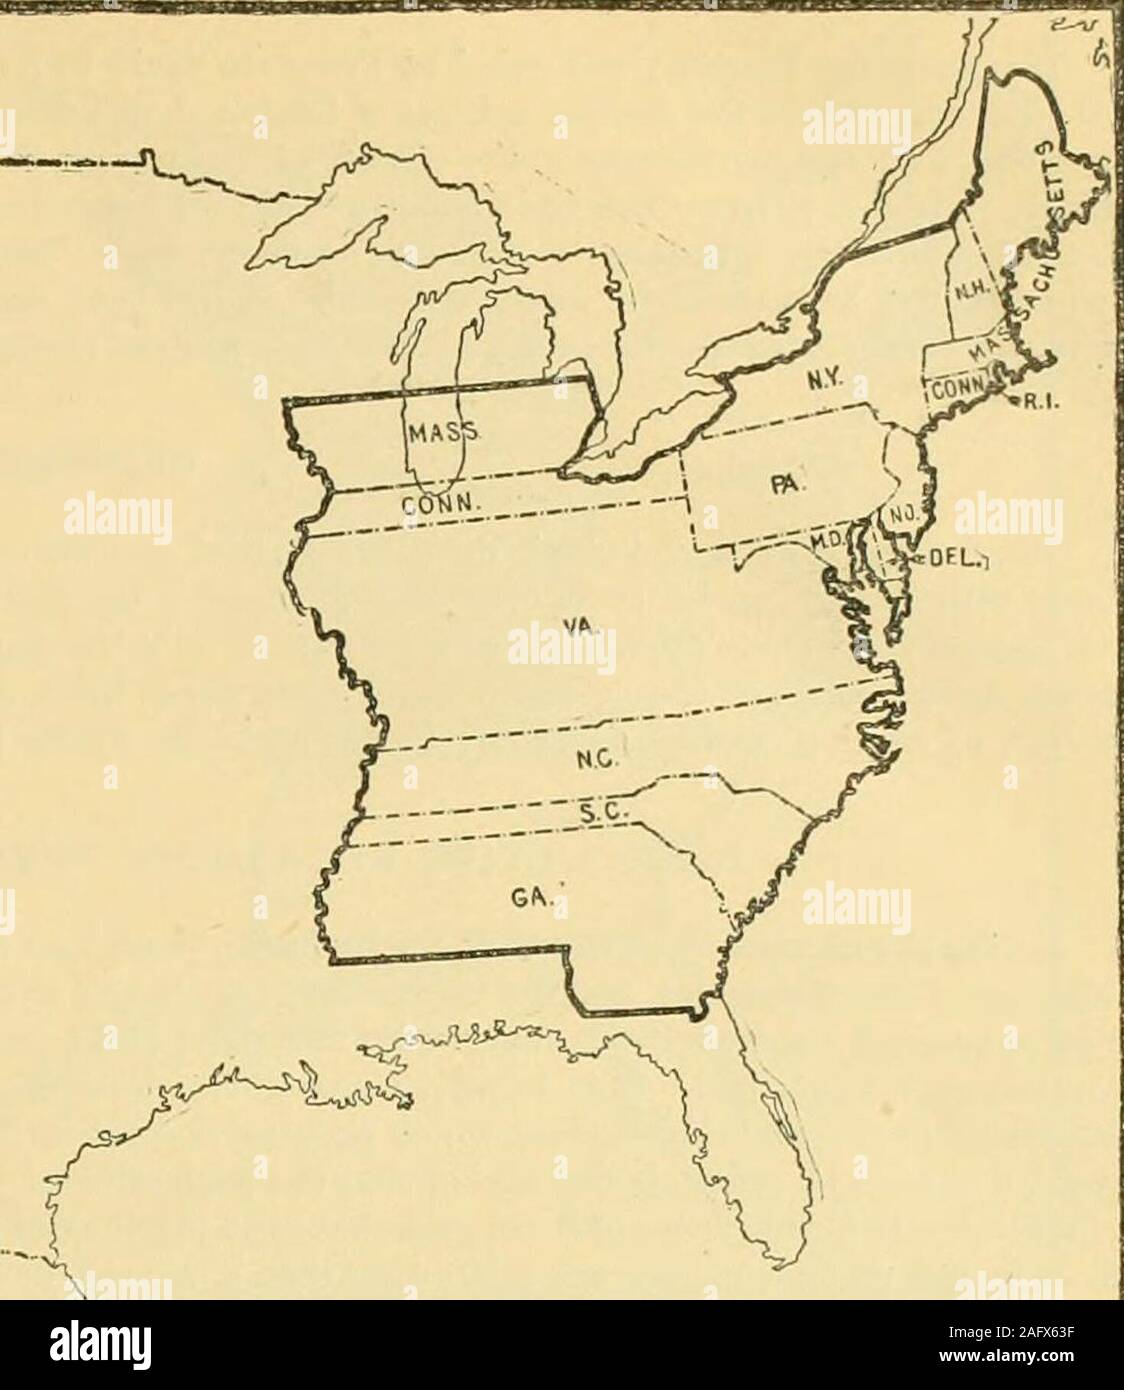 . Territorial expansion of the United States. The additions made to the territory of the thirteen colonies and its transformation into territories and states. ?^i. v^ . No. 1.—17iC. Area of the TniRTEEX Coloxies at Date of Revolution.territorialexpan00unit Stock Photo